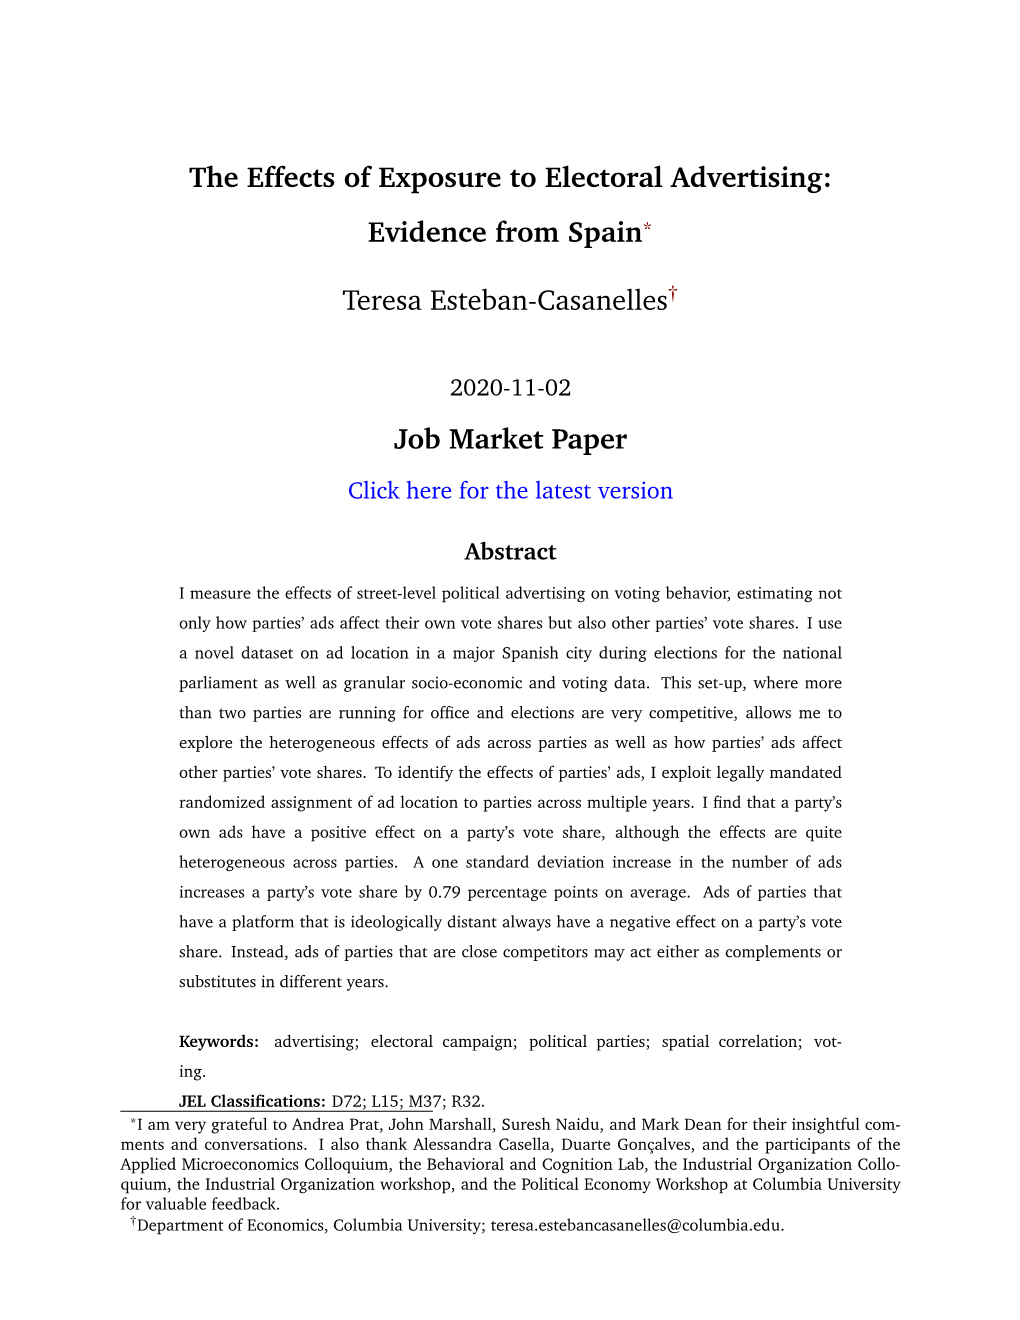 The Effects of Exposure to Electoral Advertising: Evidence from Spain* Teresa Esteban-Casanelles† Job Market Paper